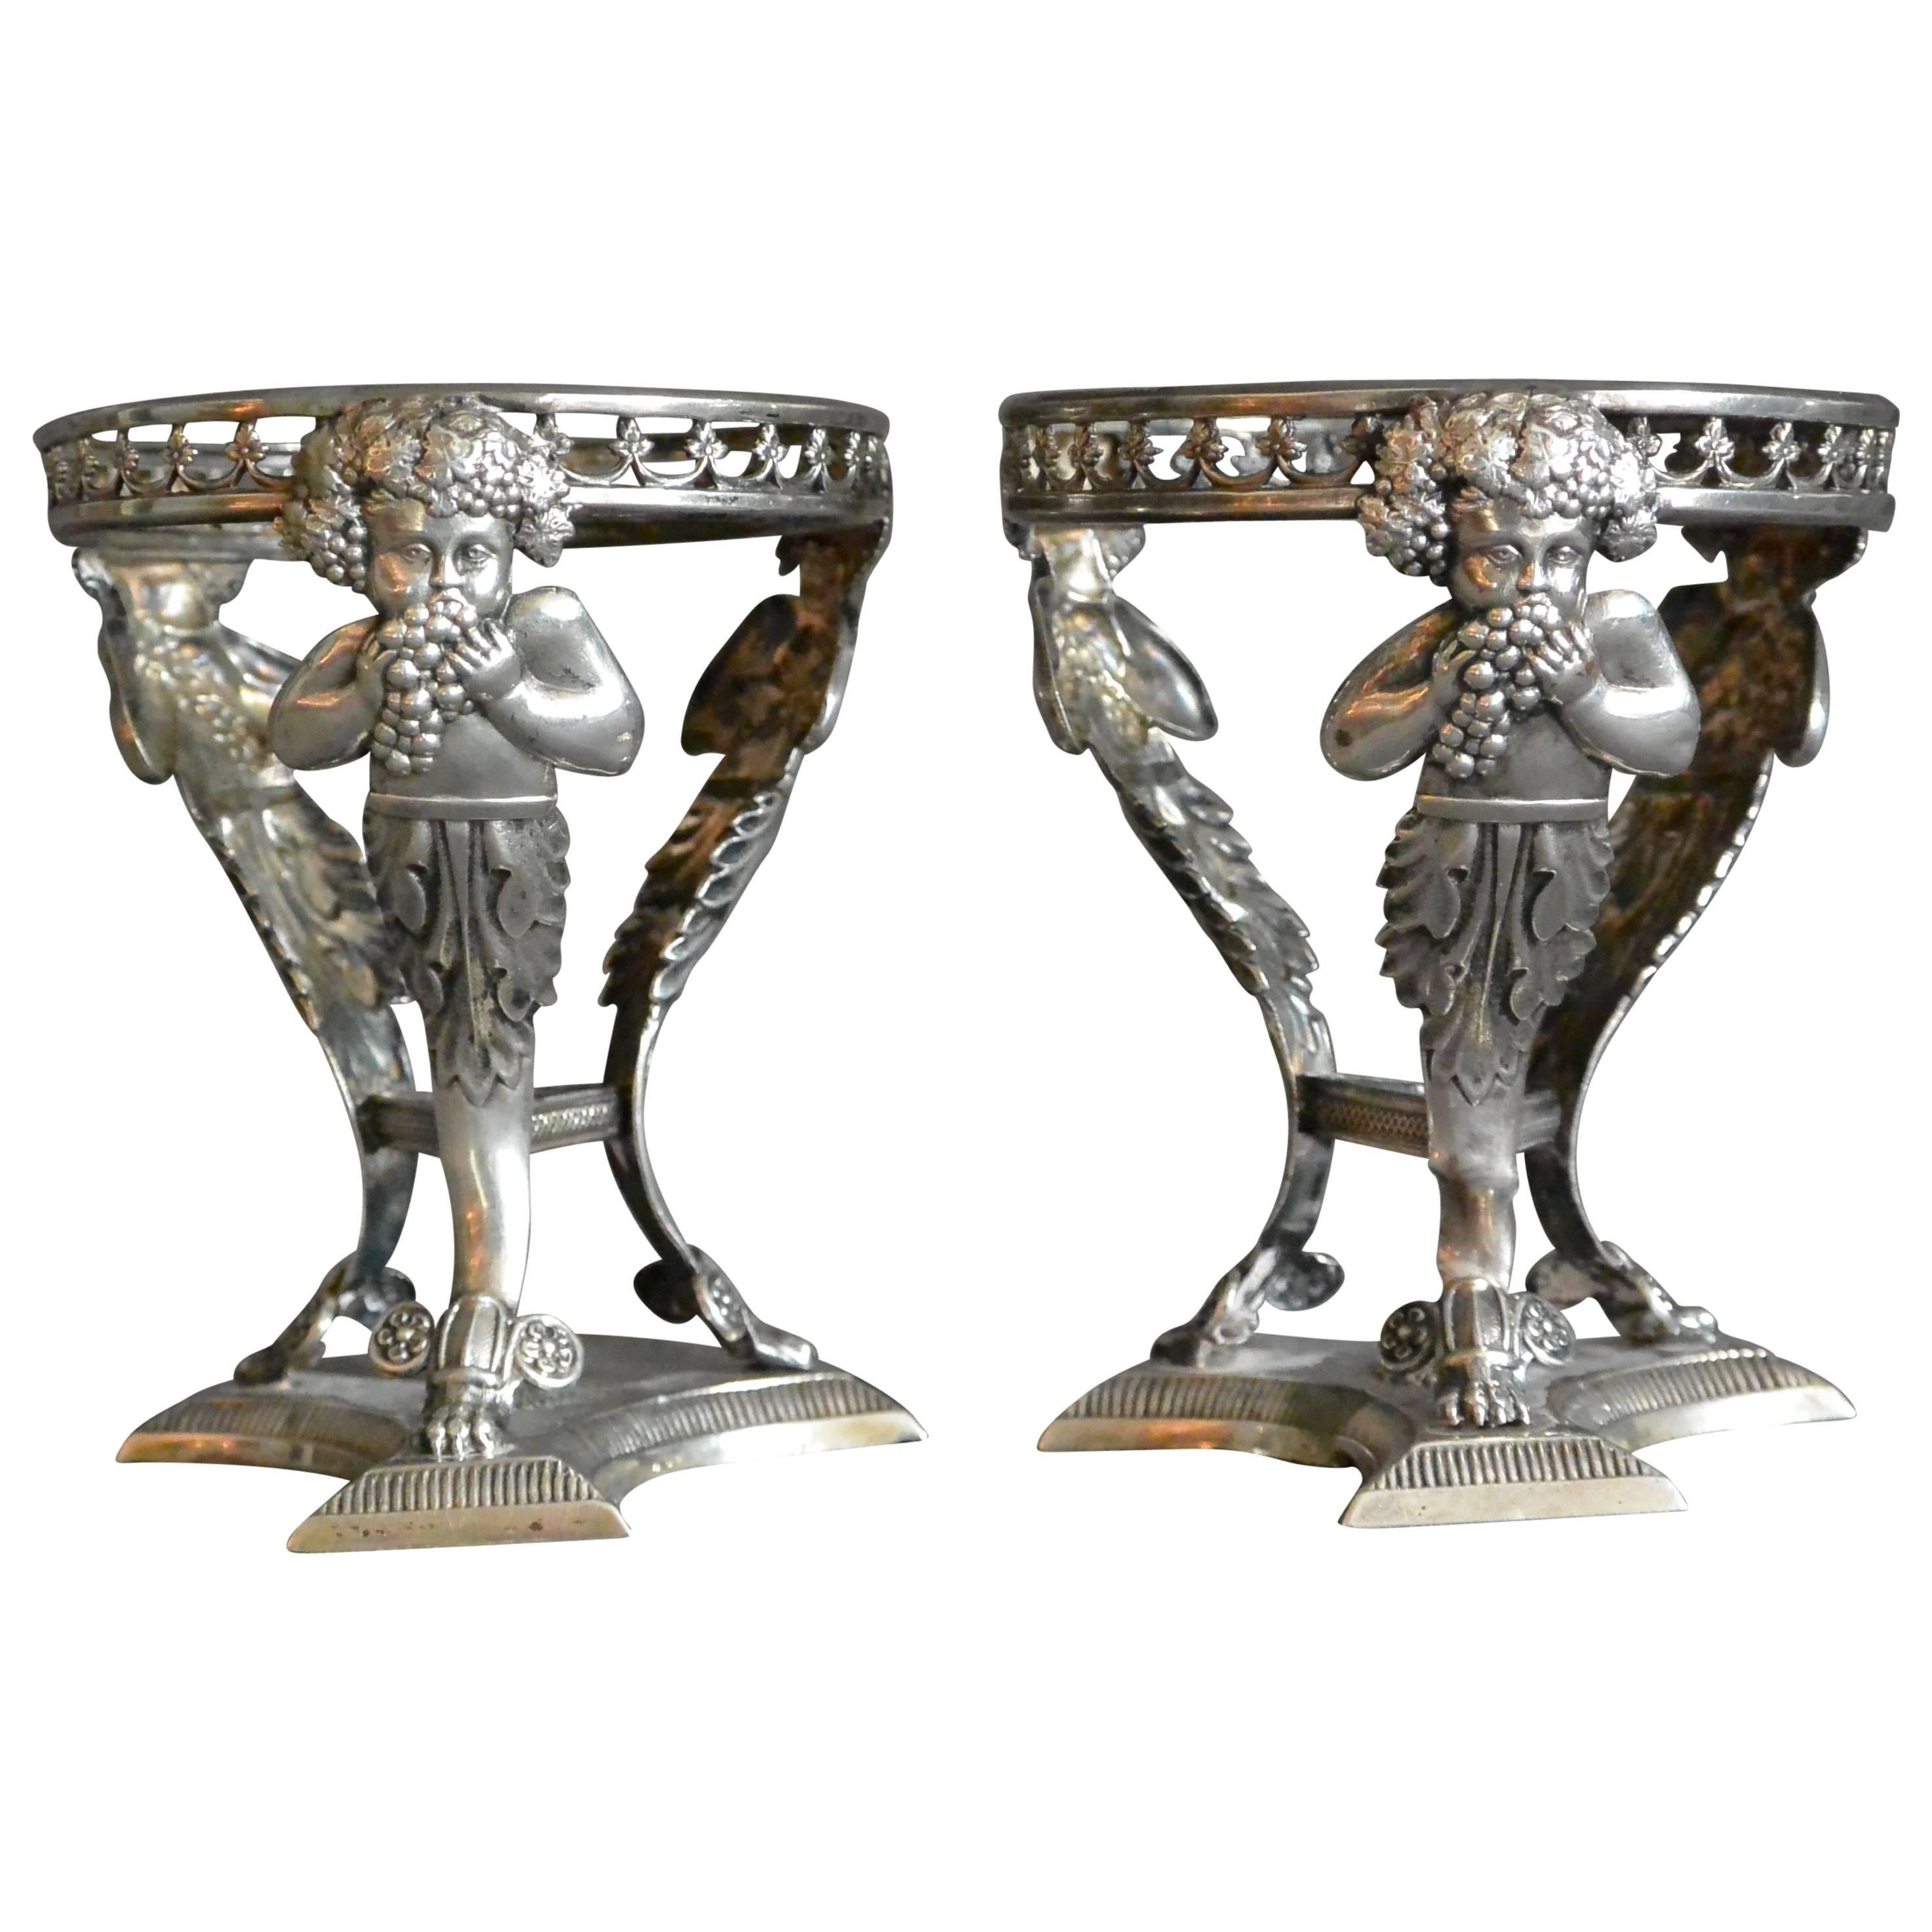 Pair of Italian Silver Salts with Bachii